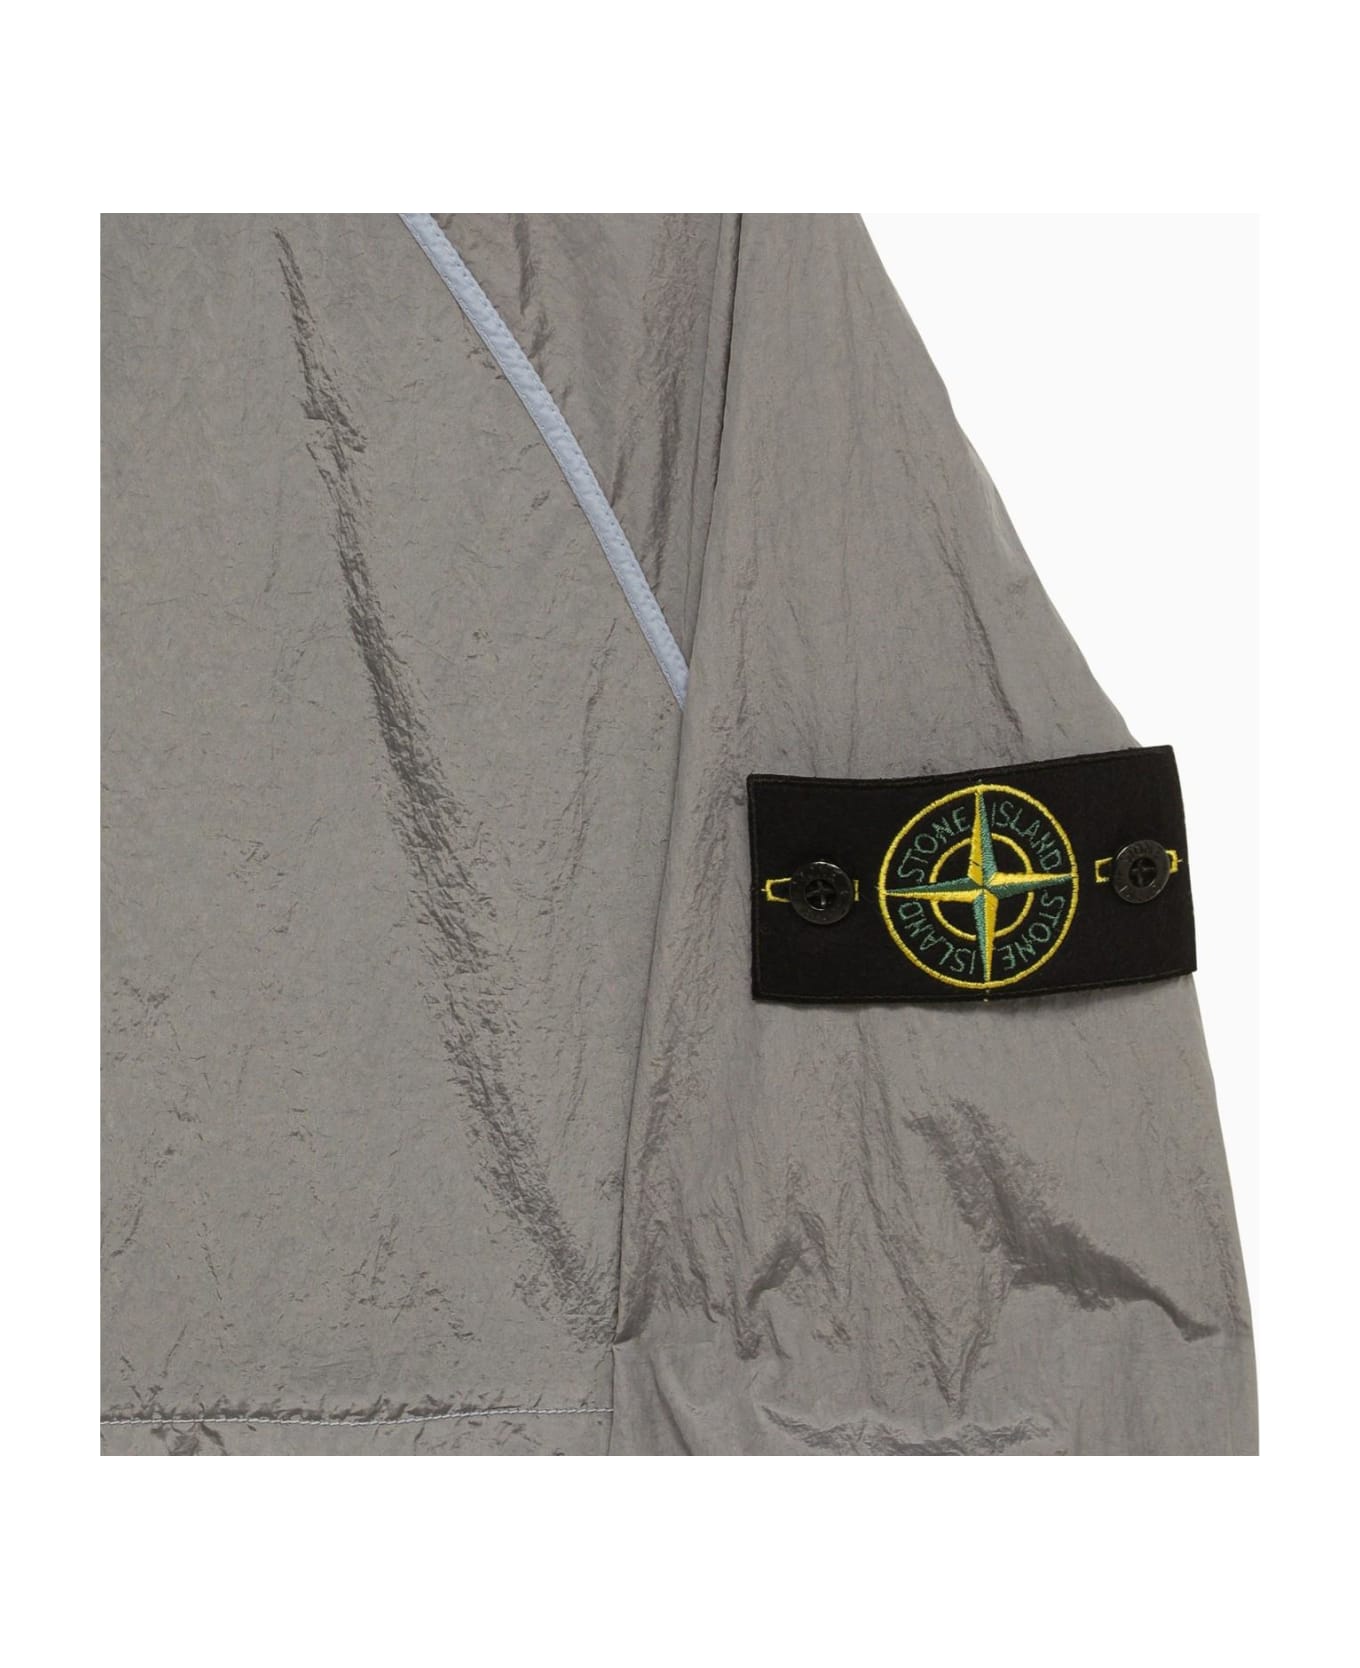 Stone Island Packable Light Blue Jacket With Logo - Grey